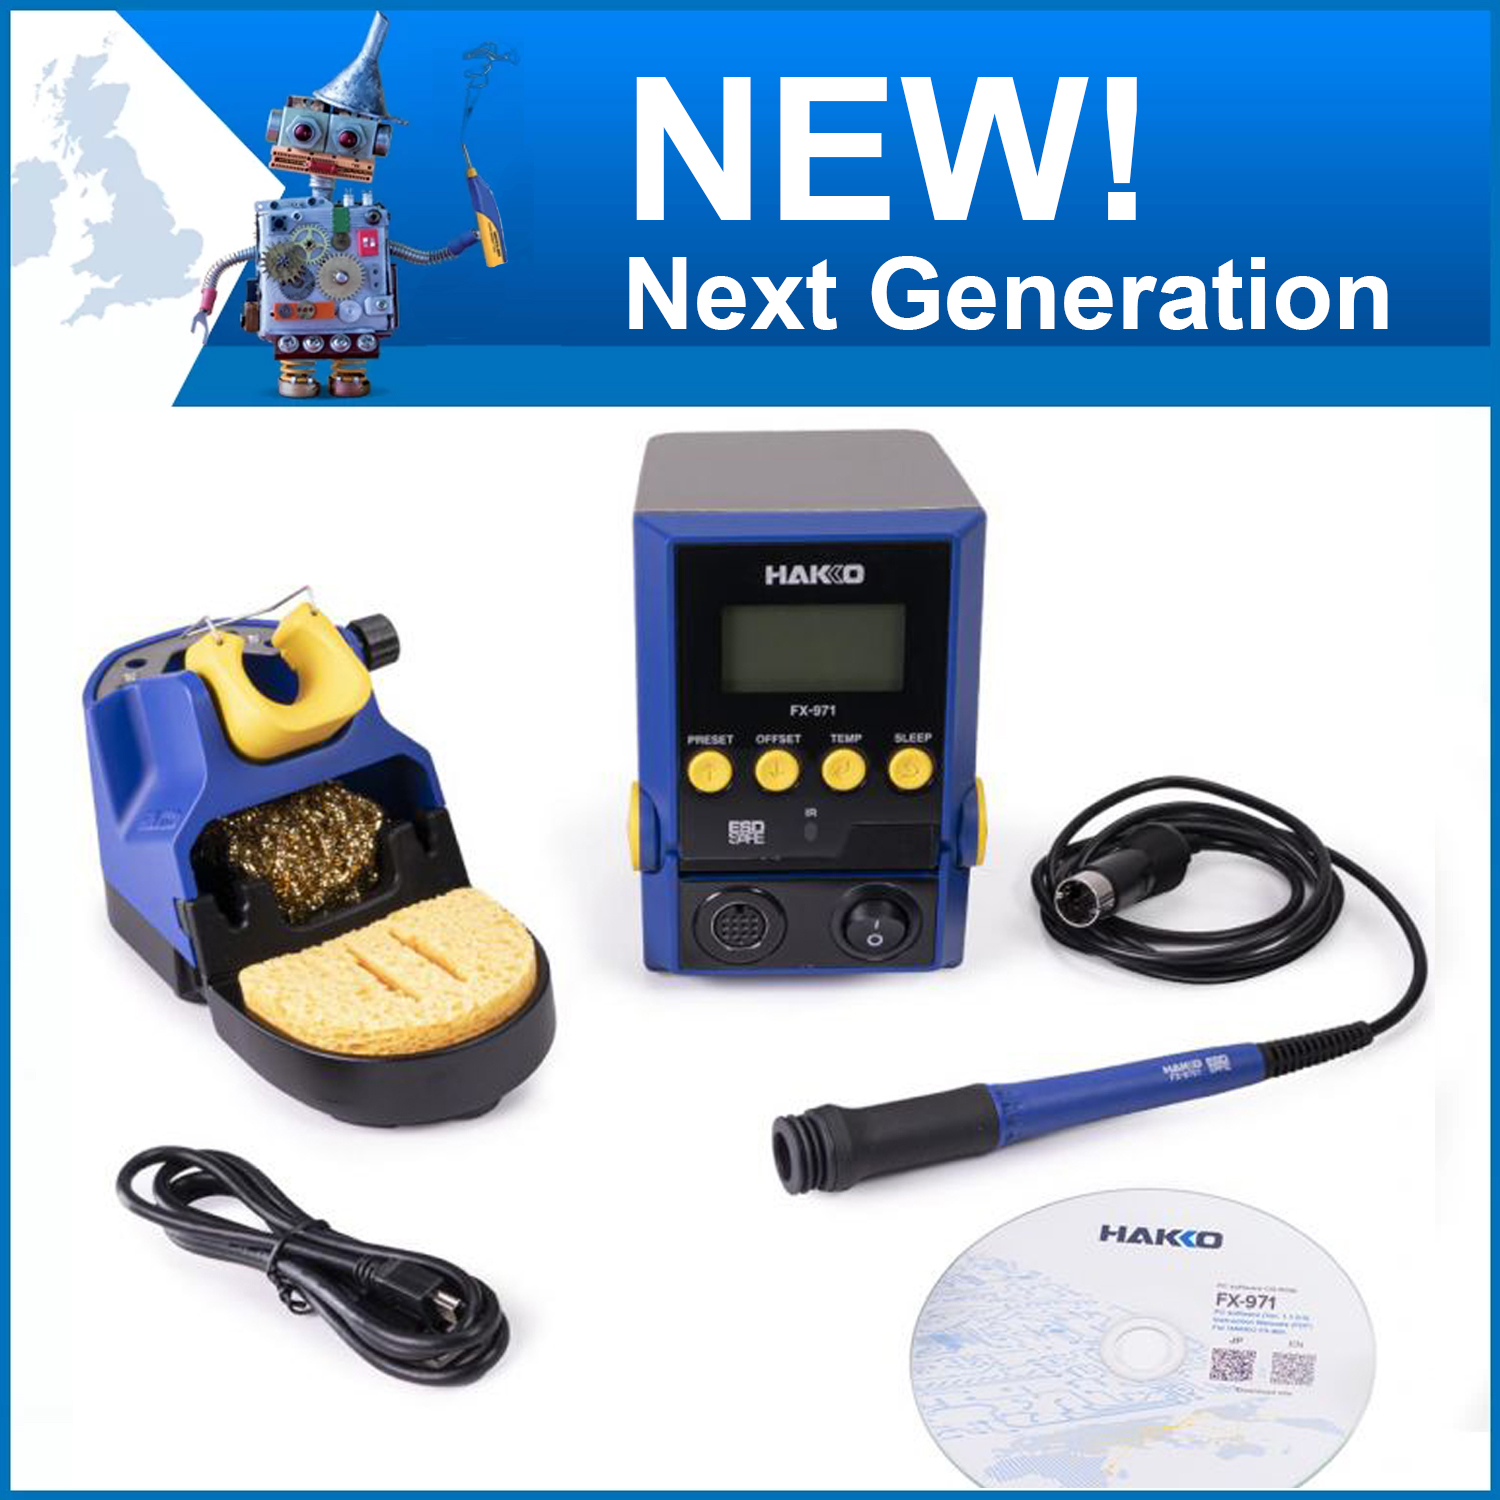 FX-971 Next Generation Compact Soldering Station with IoT Connectivity